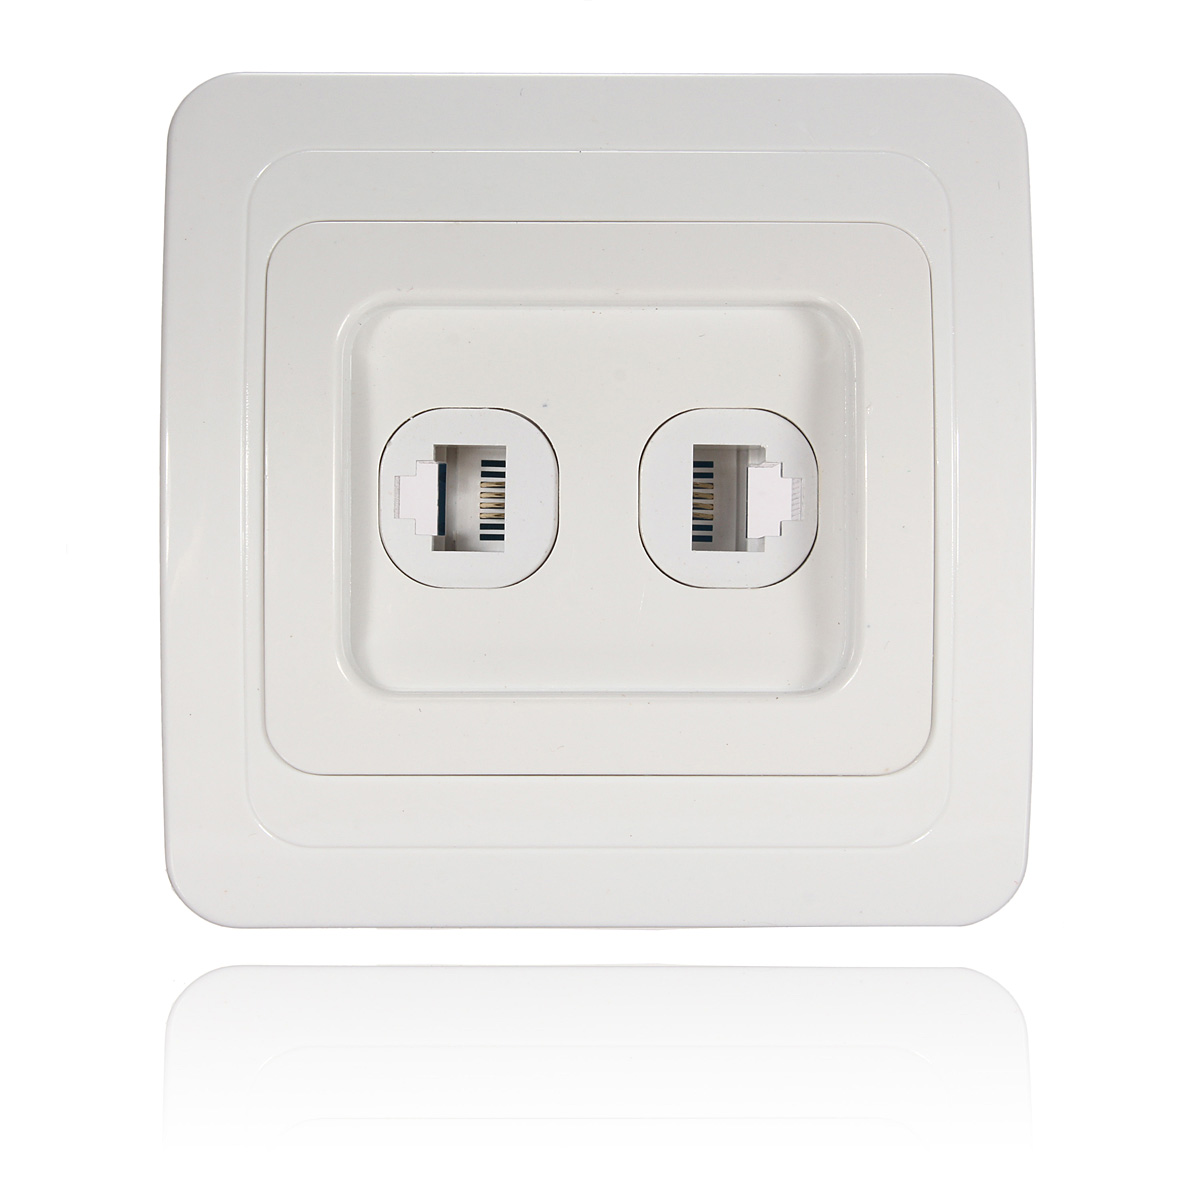 RJ11-Electric-Wall-Station-Socket-Telephone-Phone-Dual-Outlet-Panel-Face-Plate-Socket-Connector-1399685-6